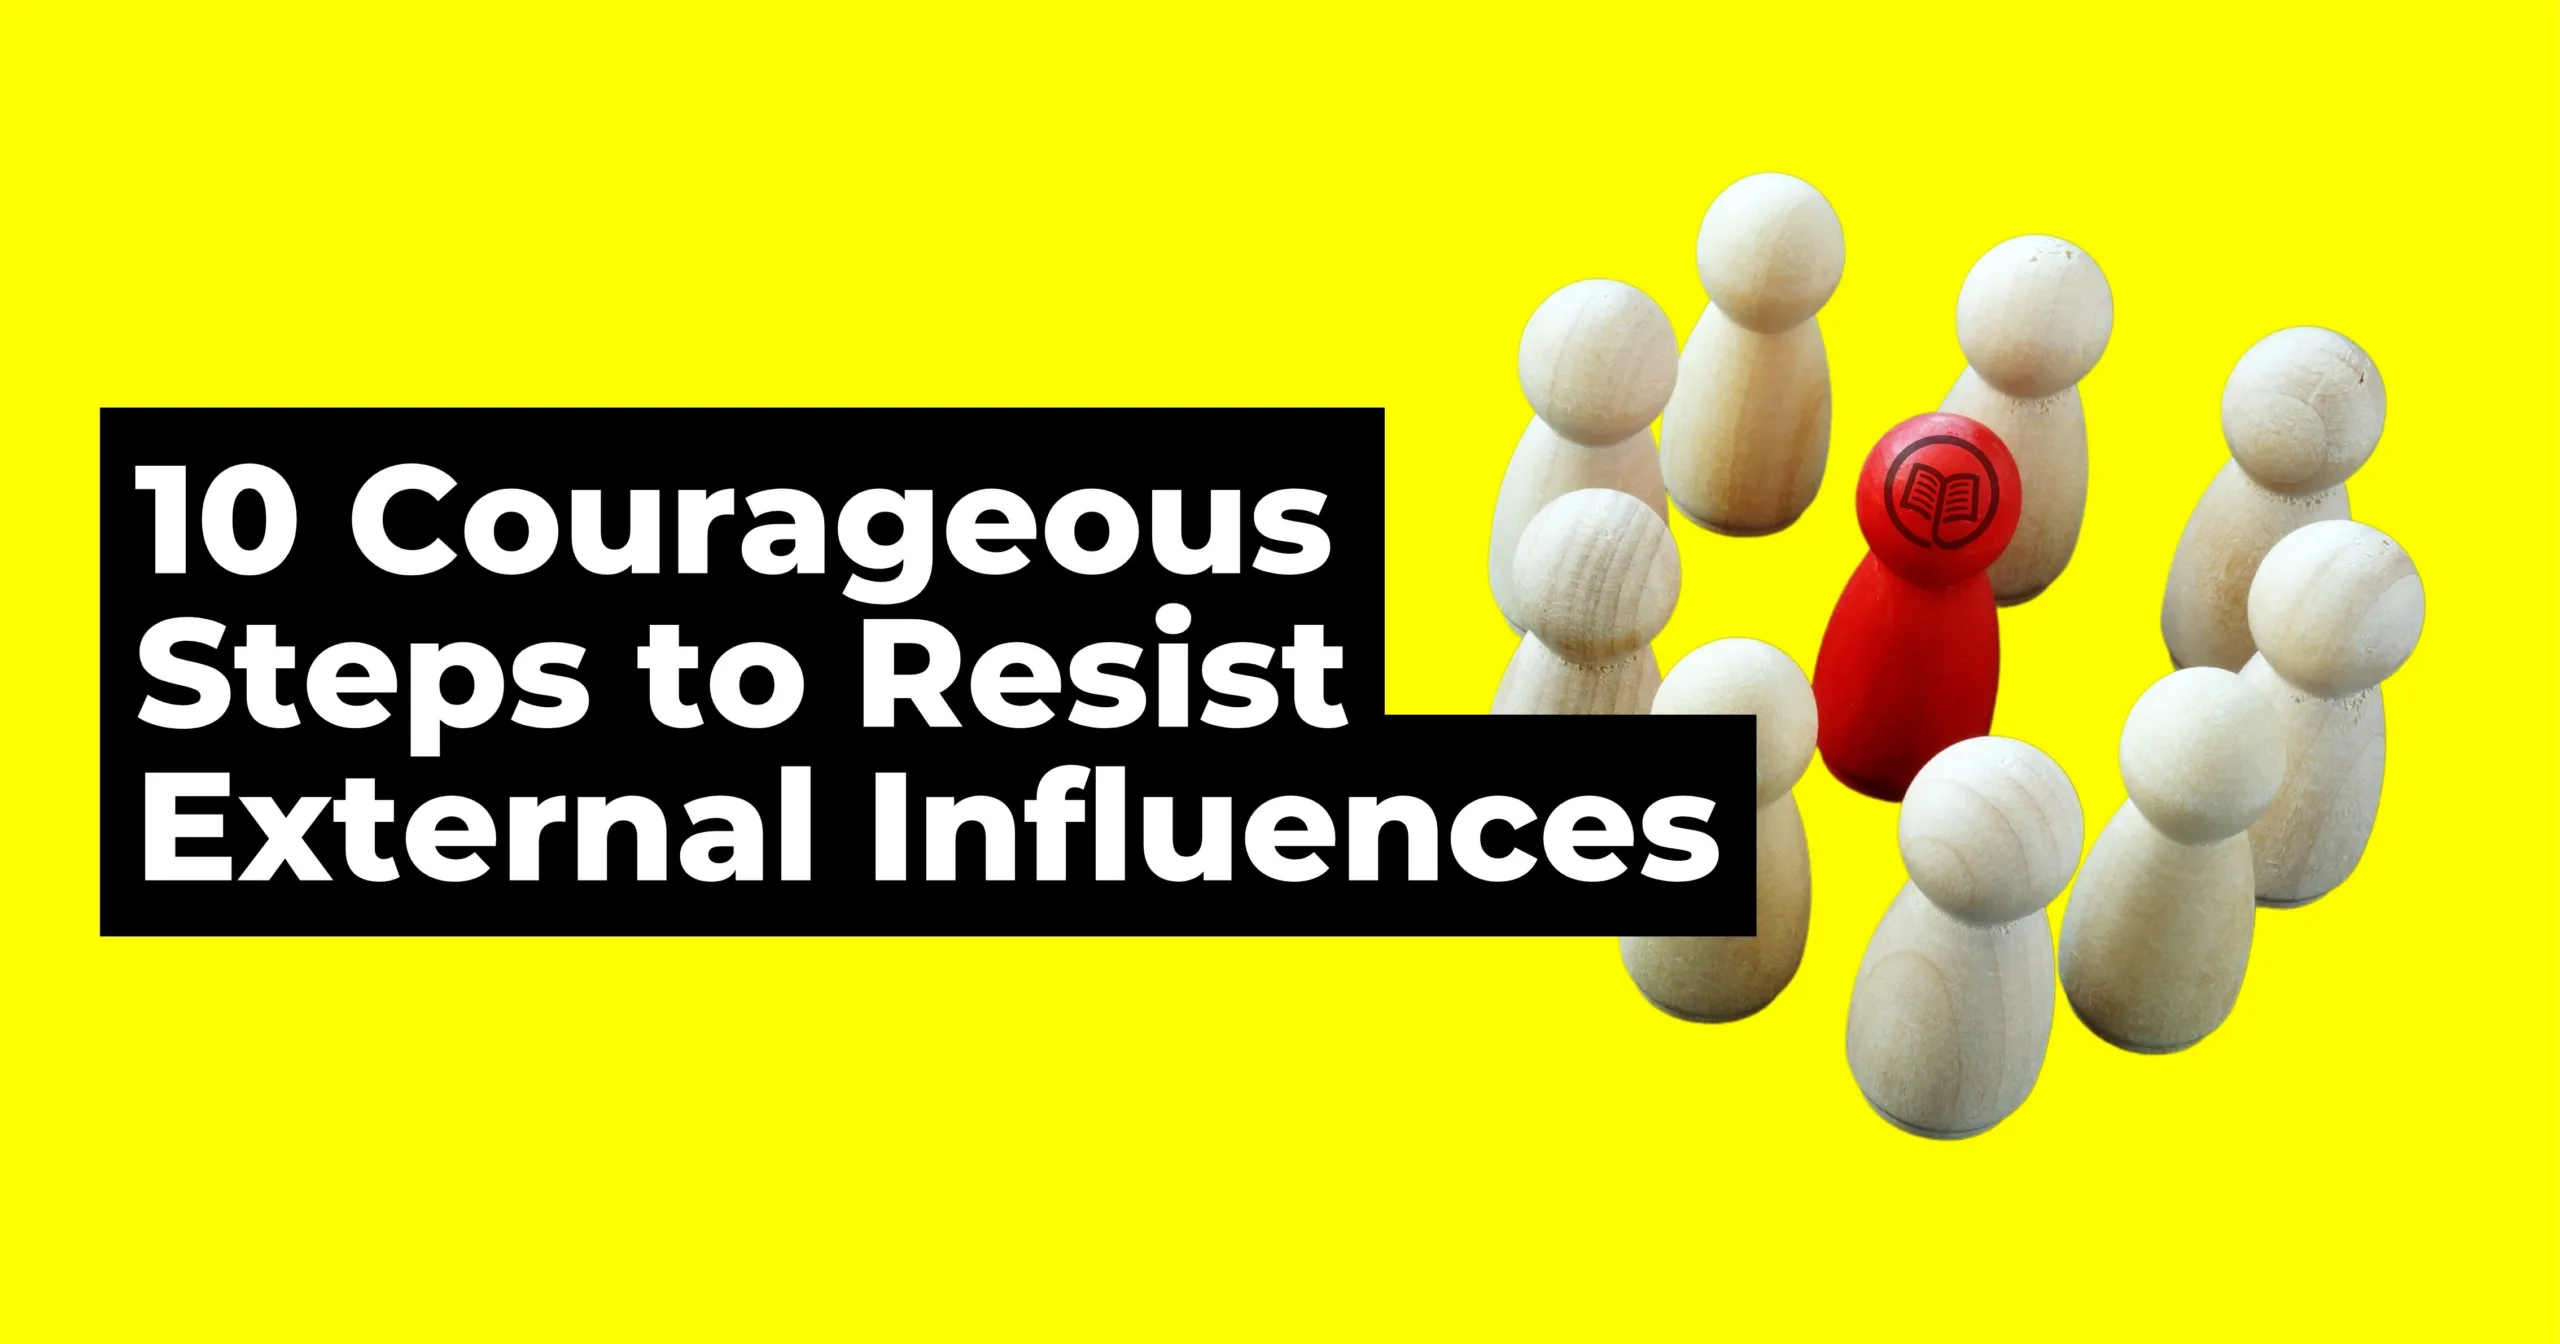 Unveiling Your True Self: 10 Courageous Steps to Resist External Influences